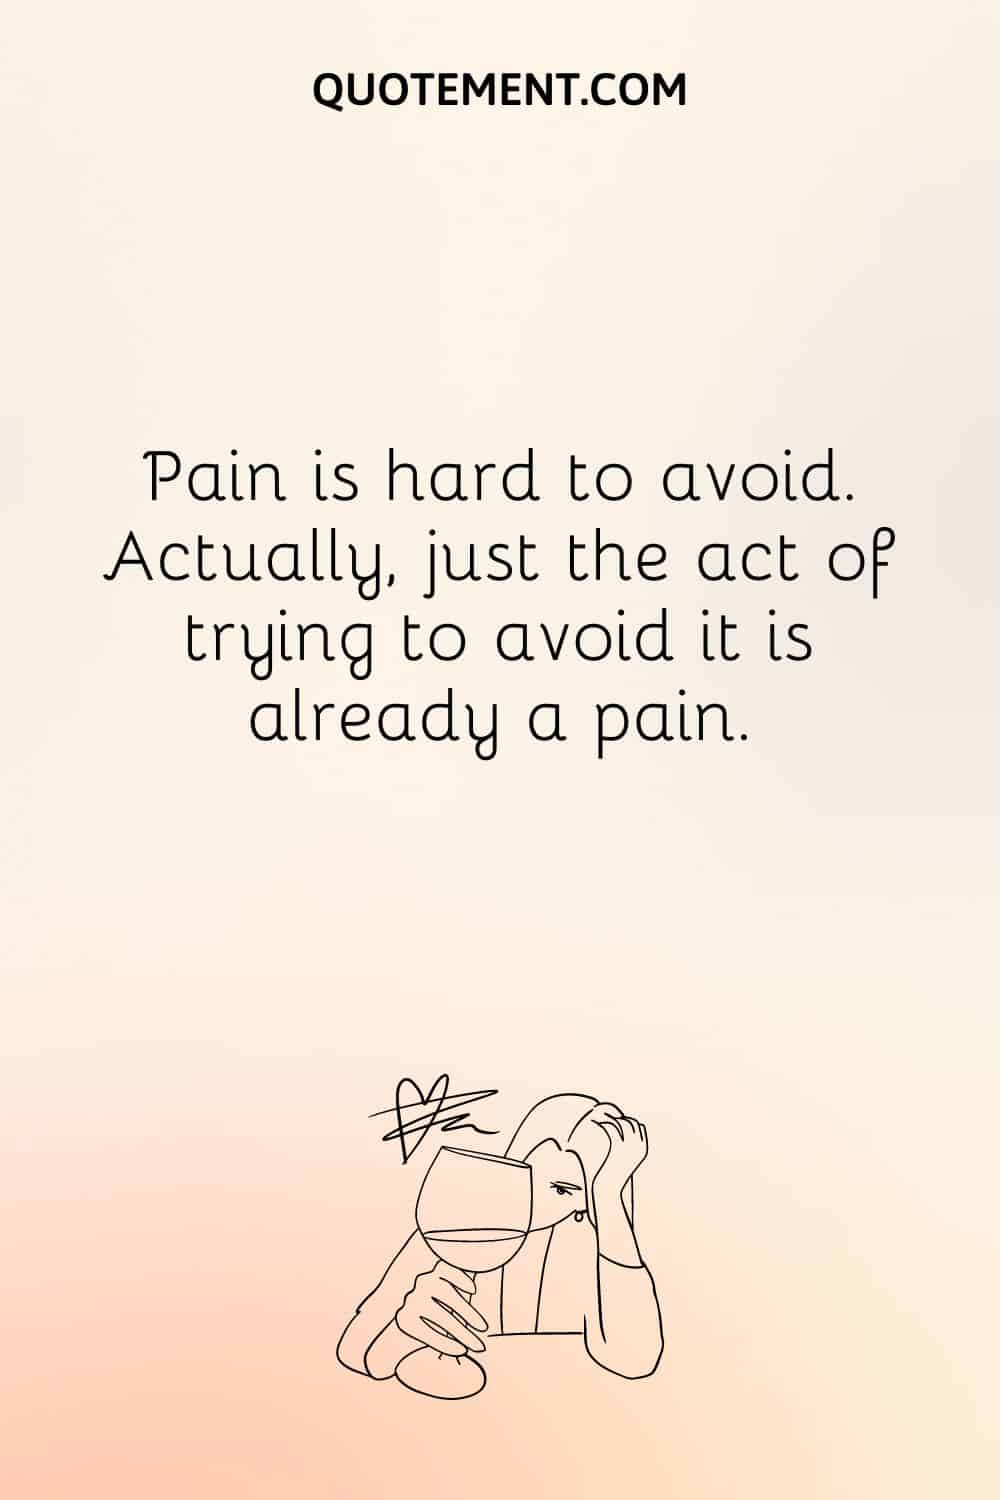 Pain is hard to avoid. Actually, just the act of trying to avoid it is already a pain.
